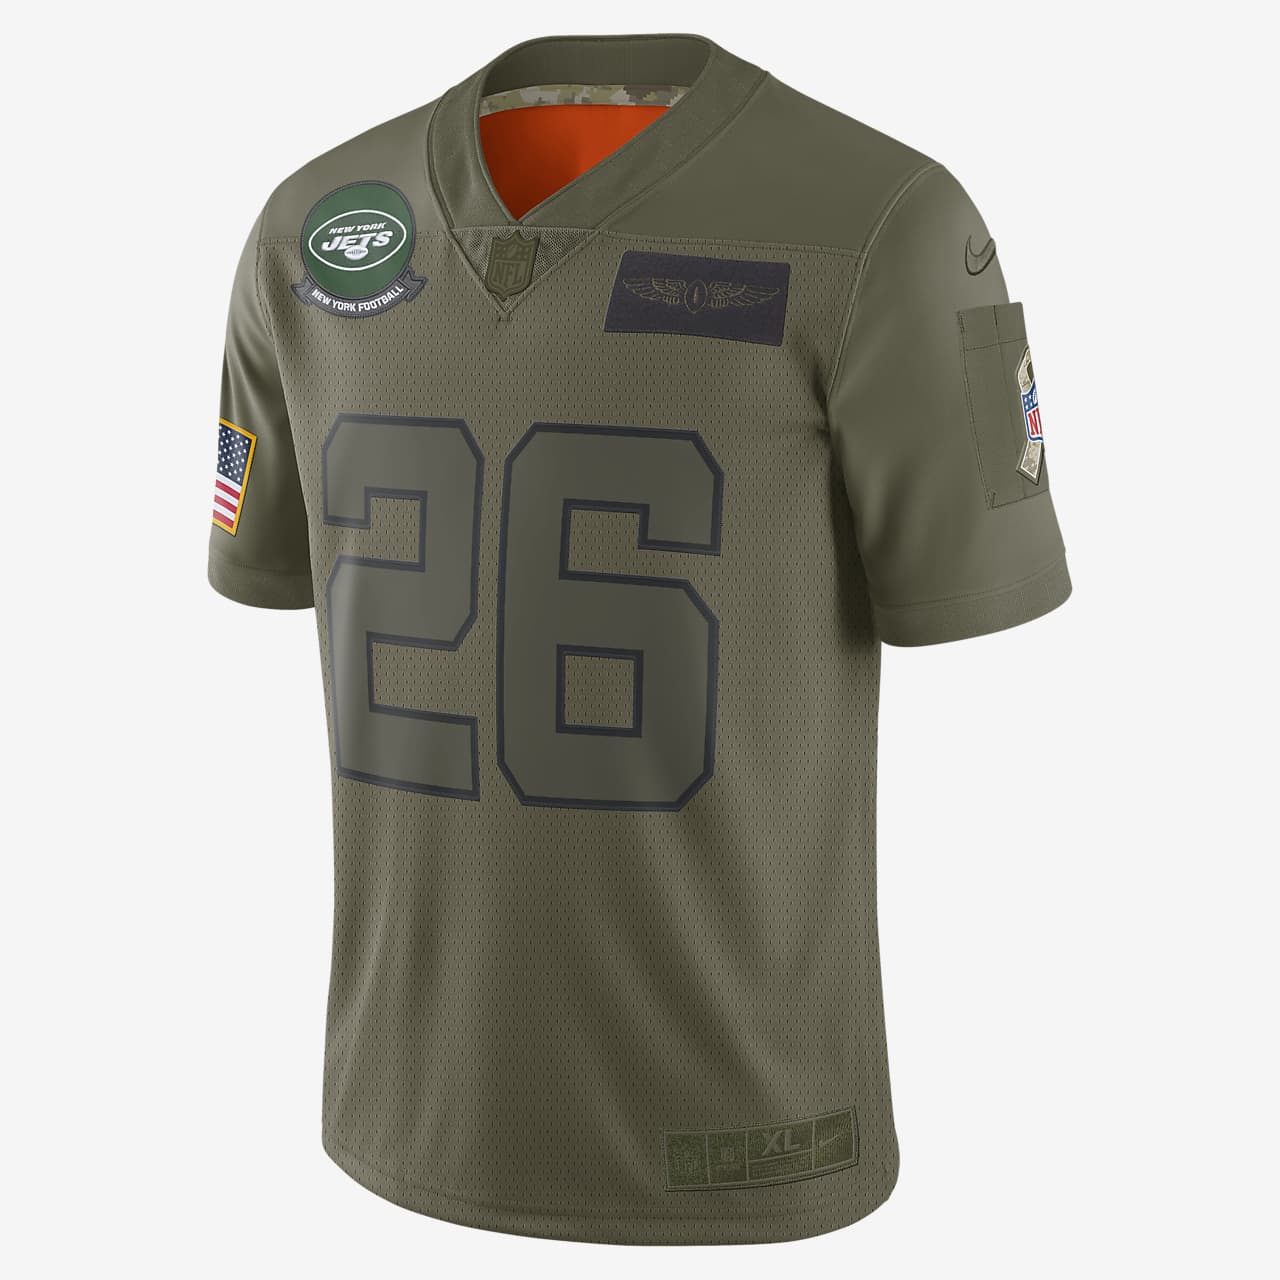 jets bell jersey